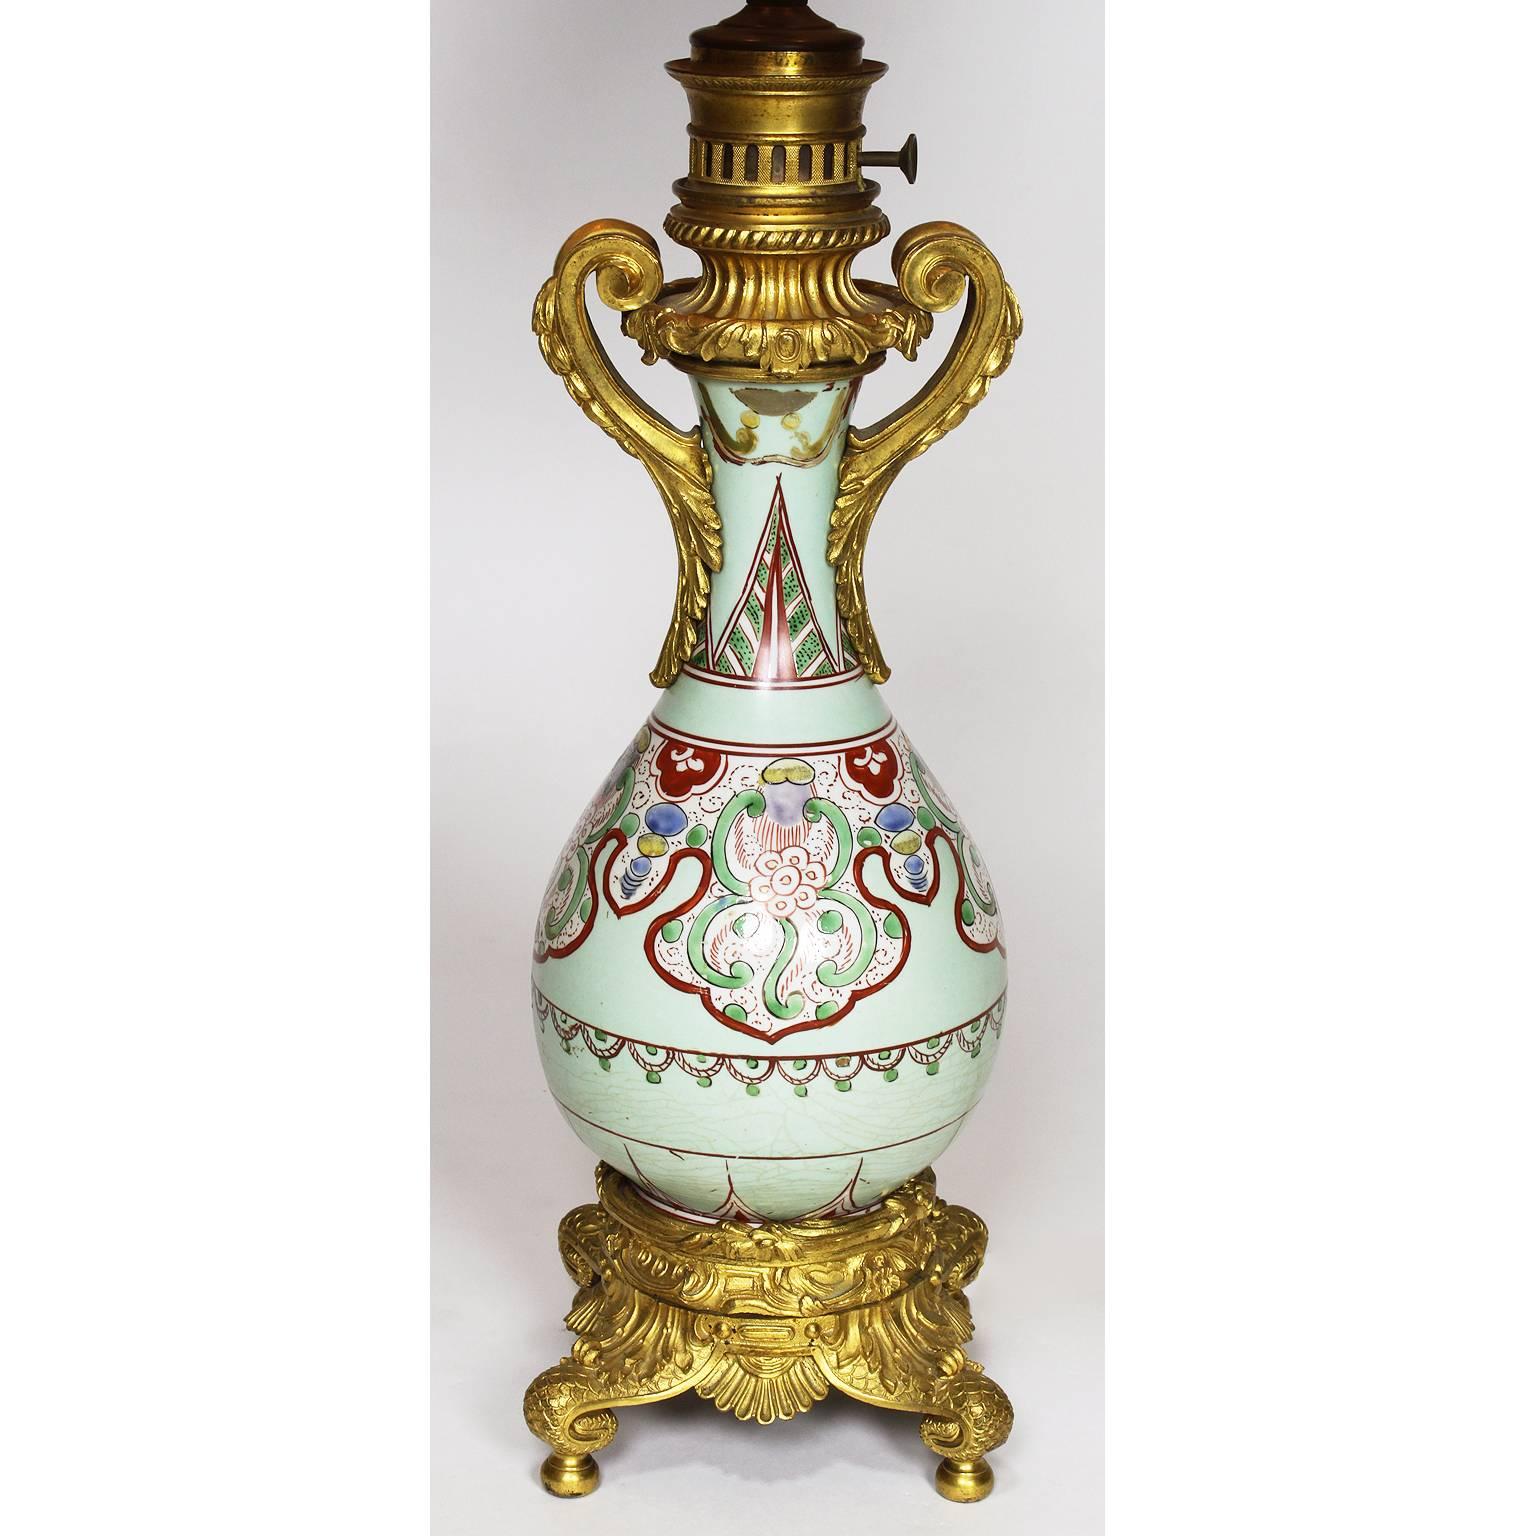 A fine pair of Chinese Export, 19th century porcelain bottle vases mounted with French ormolu as oil lamps. The well potted ovoid porcelain pear-shaped body decorated with hand-painted asymmetrical and floral designs in pale-green, red, light-blue